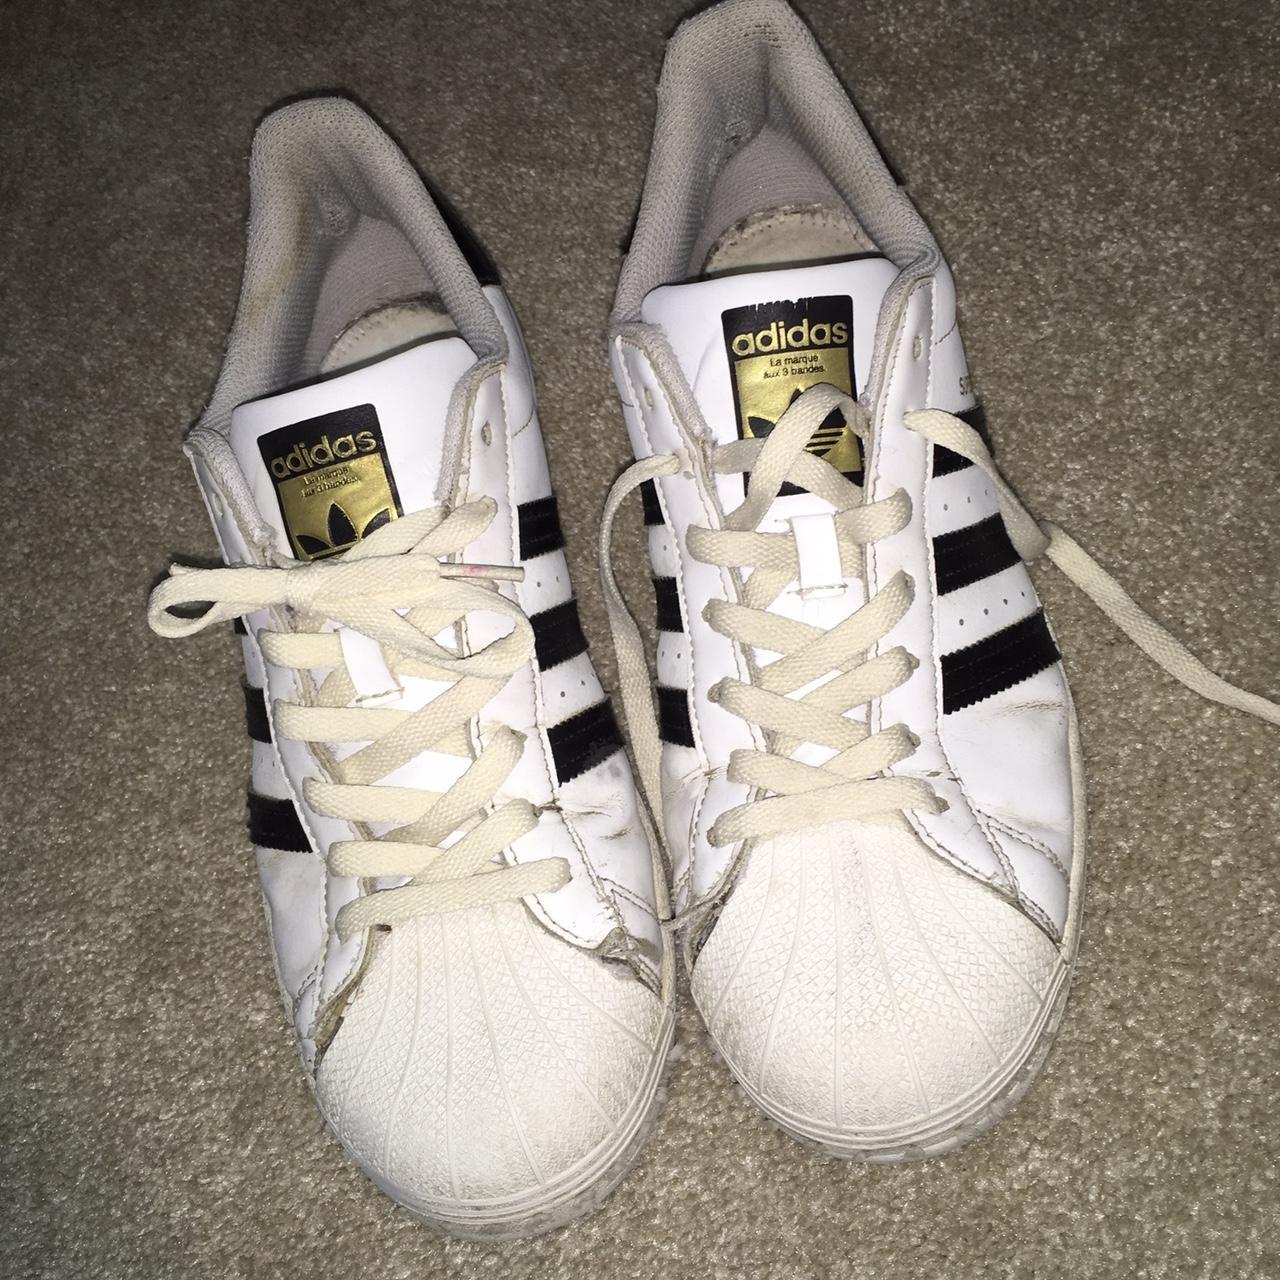 Adidas super star white size 10.5 DEPOP AND PAYPAL... - Depop